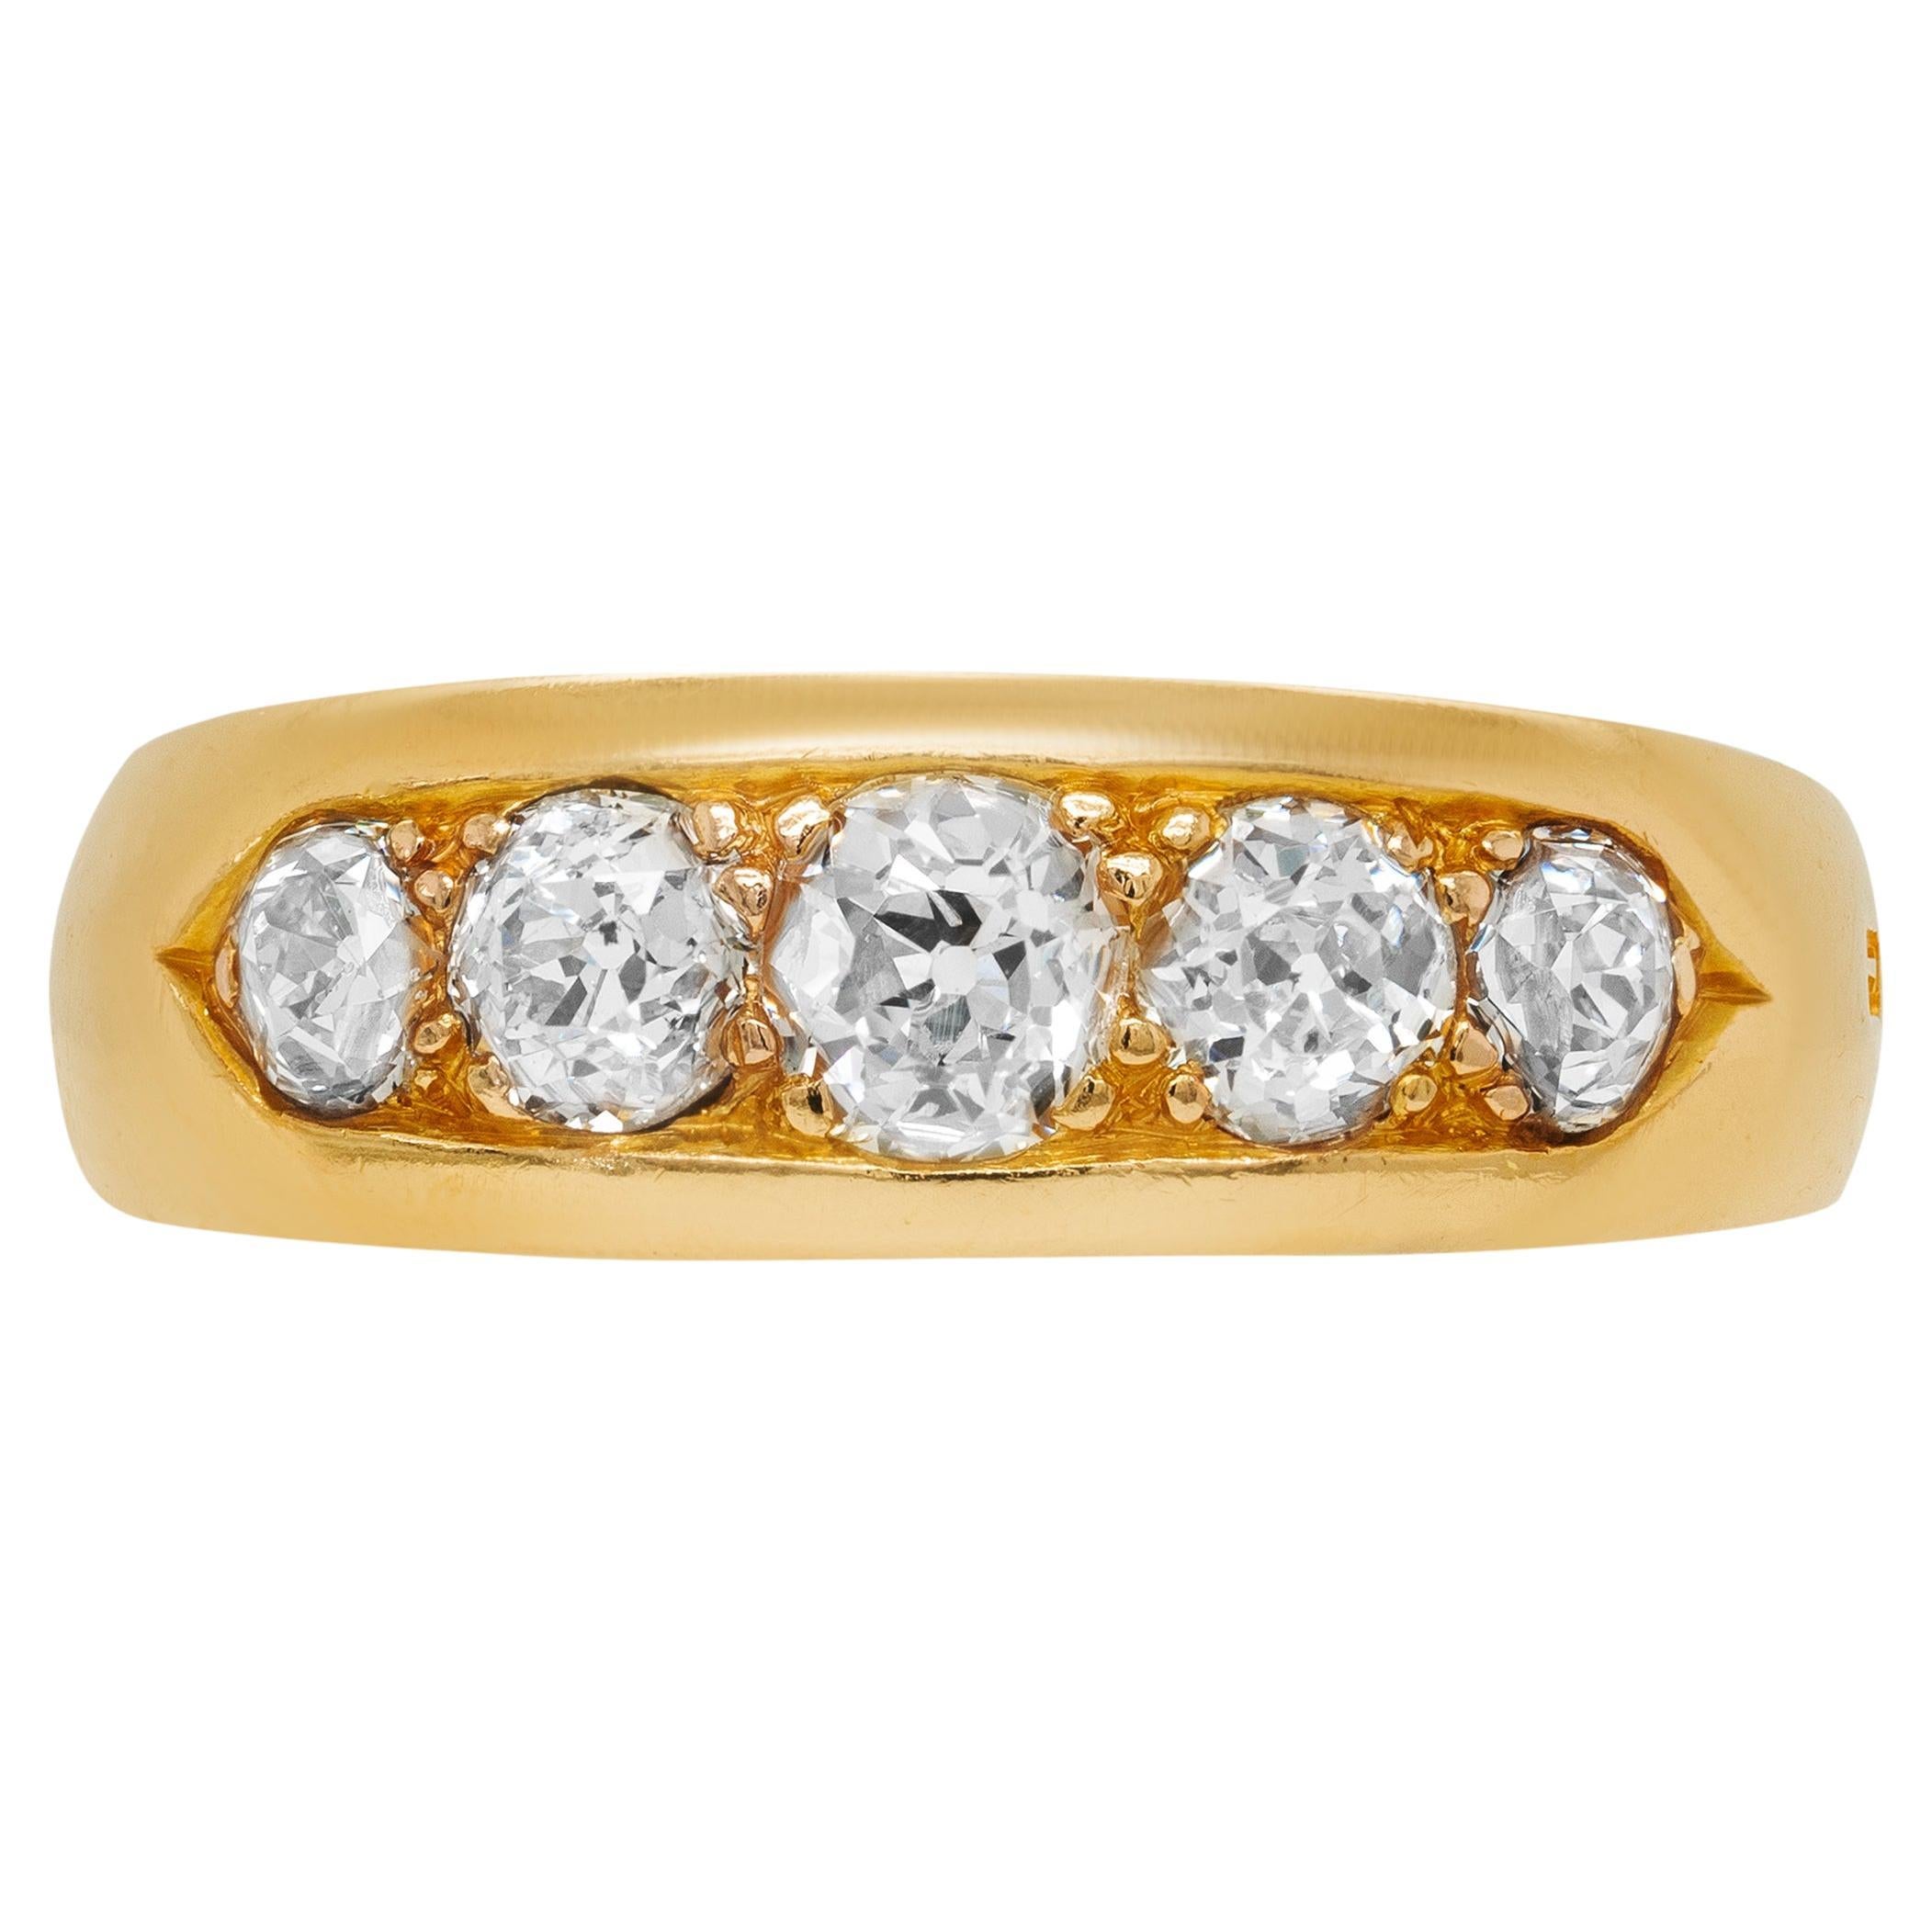 Antique Old Cut Diamond 18 Carat Yellow Gold Five-Stone Ring, 1886 For Sale